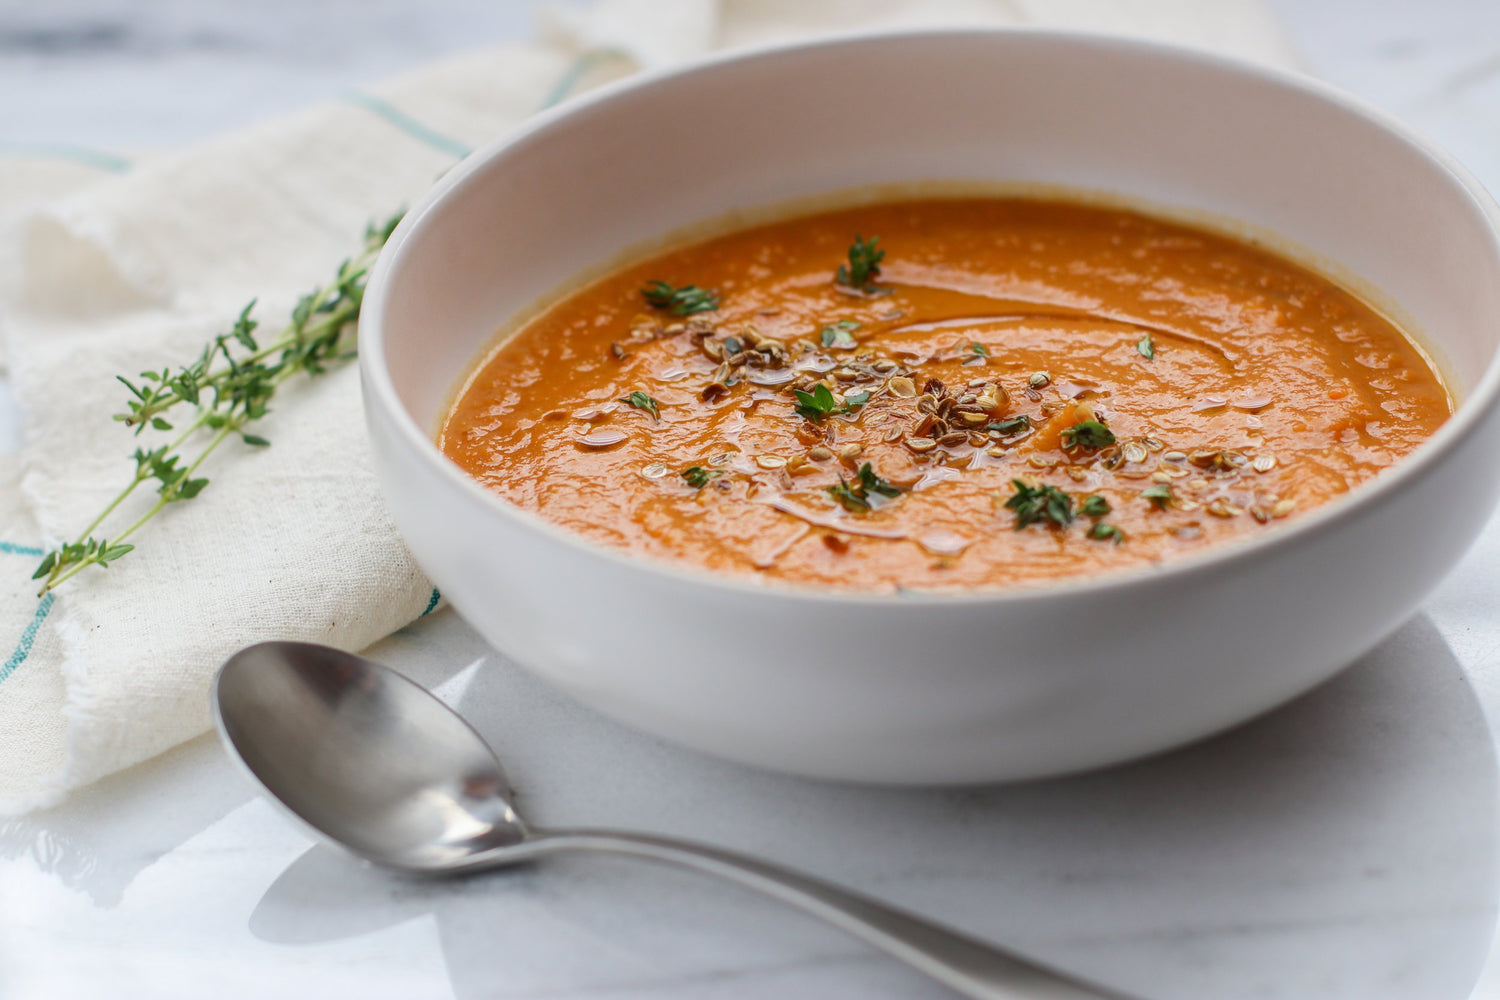 Savory Roasted Root Vegetable Soup